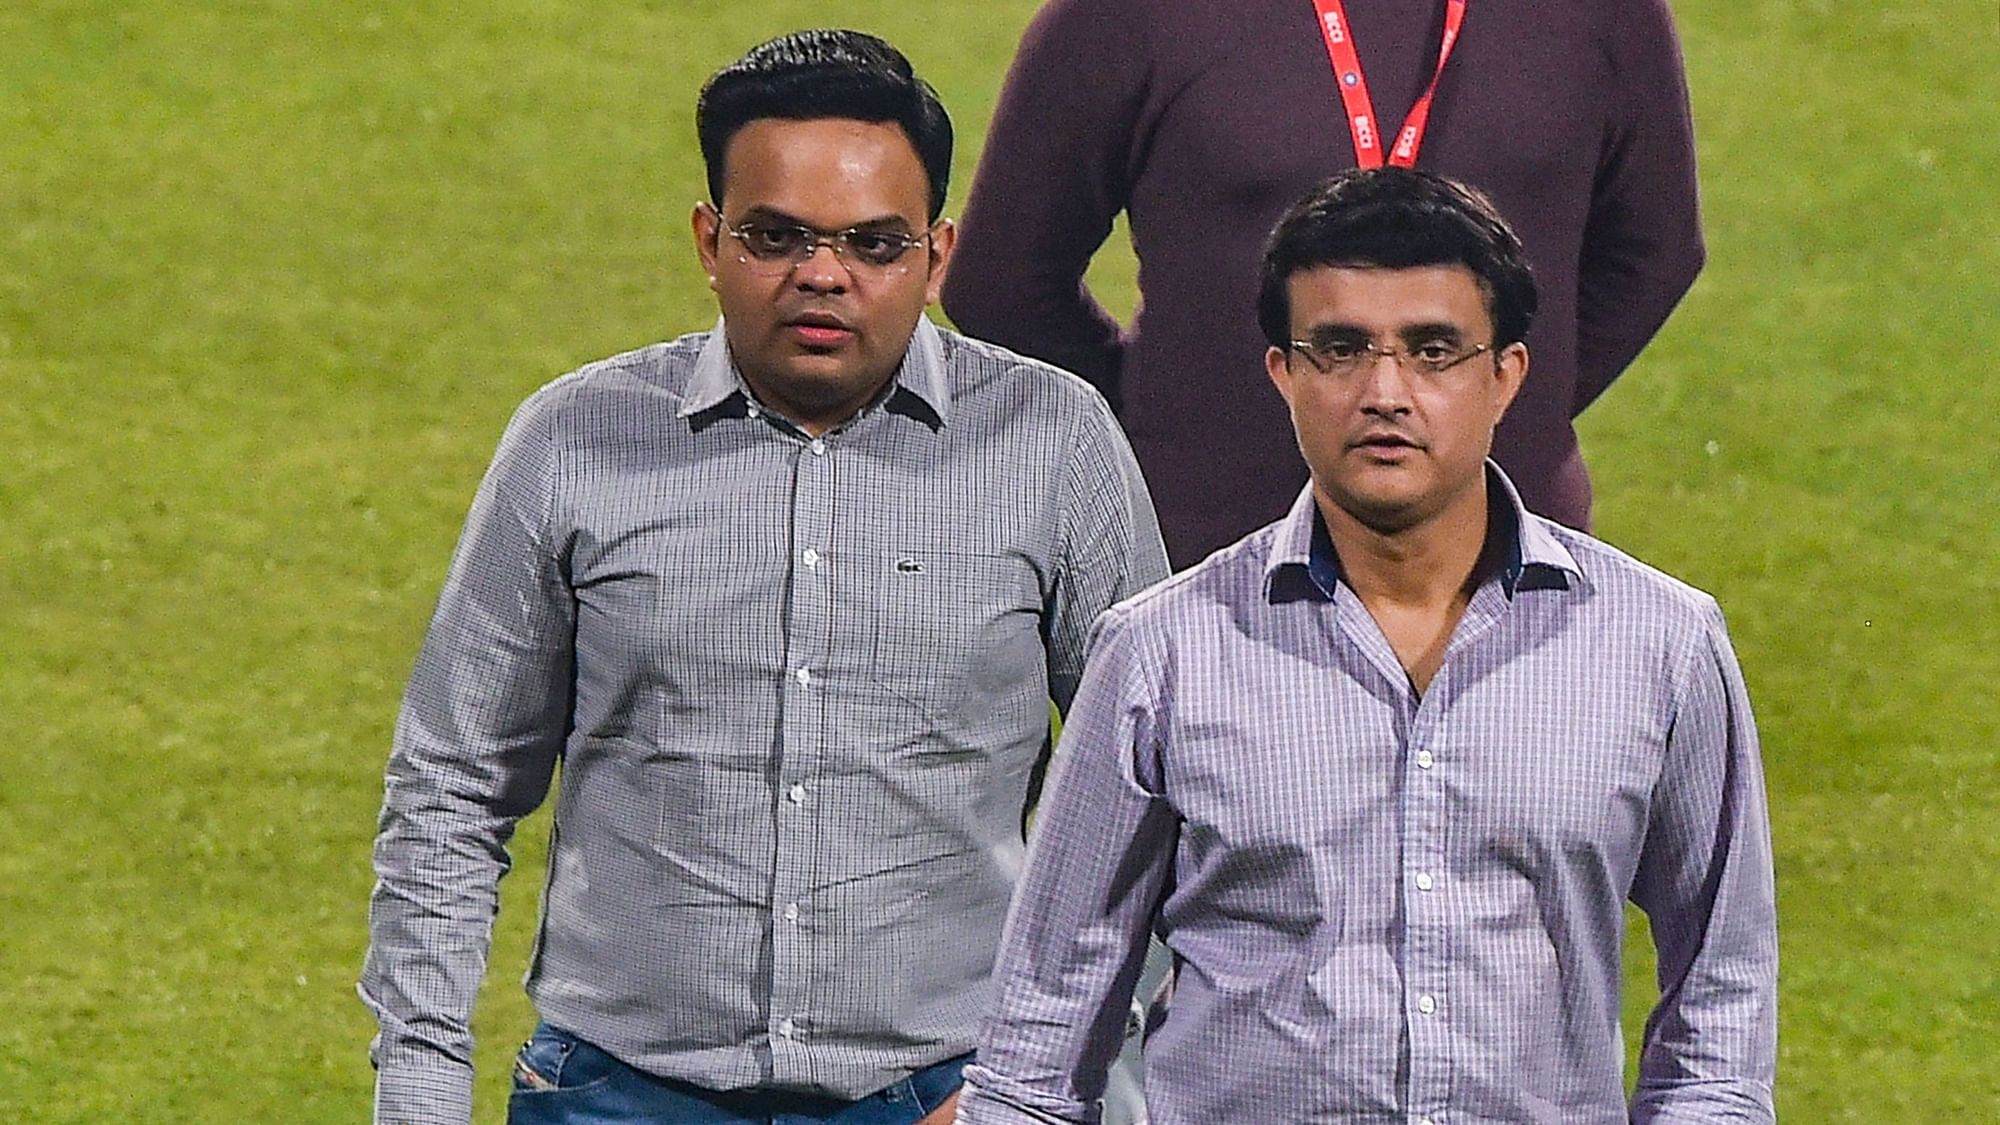 Sourav Ganguly spearheaded the move that saw India take a historic step towards playing Day/Night cricket.